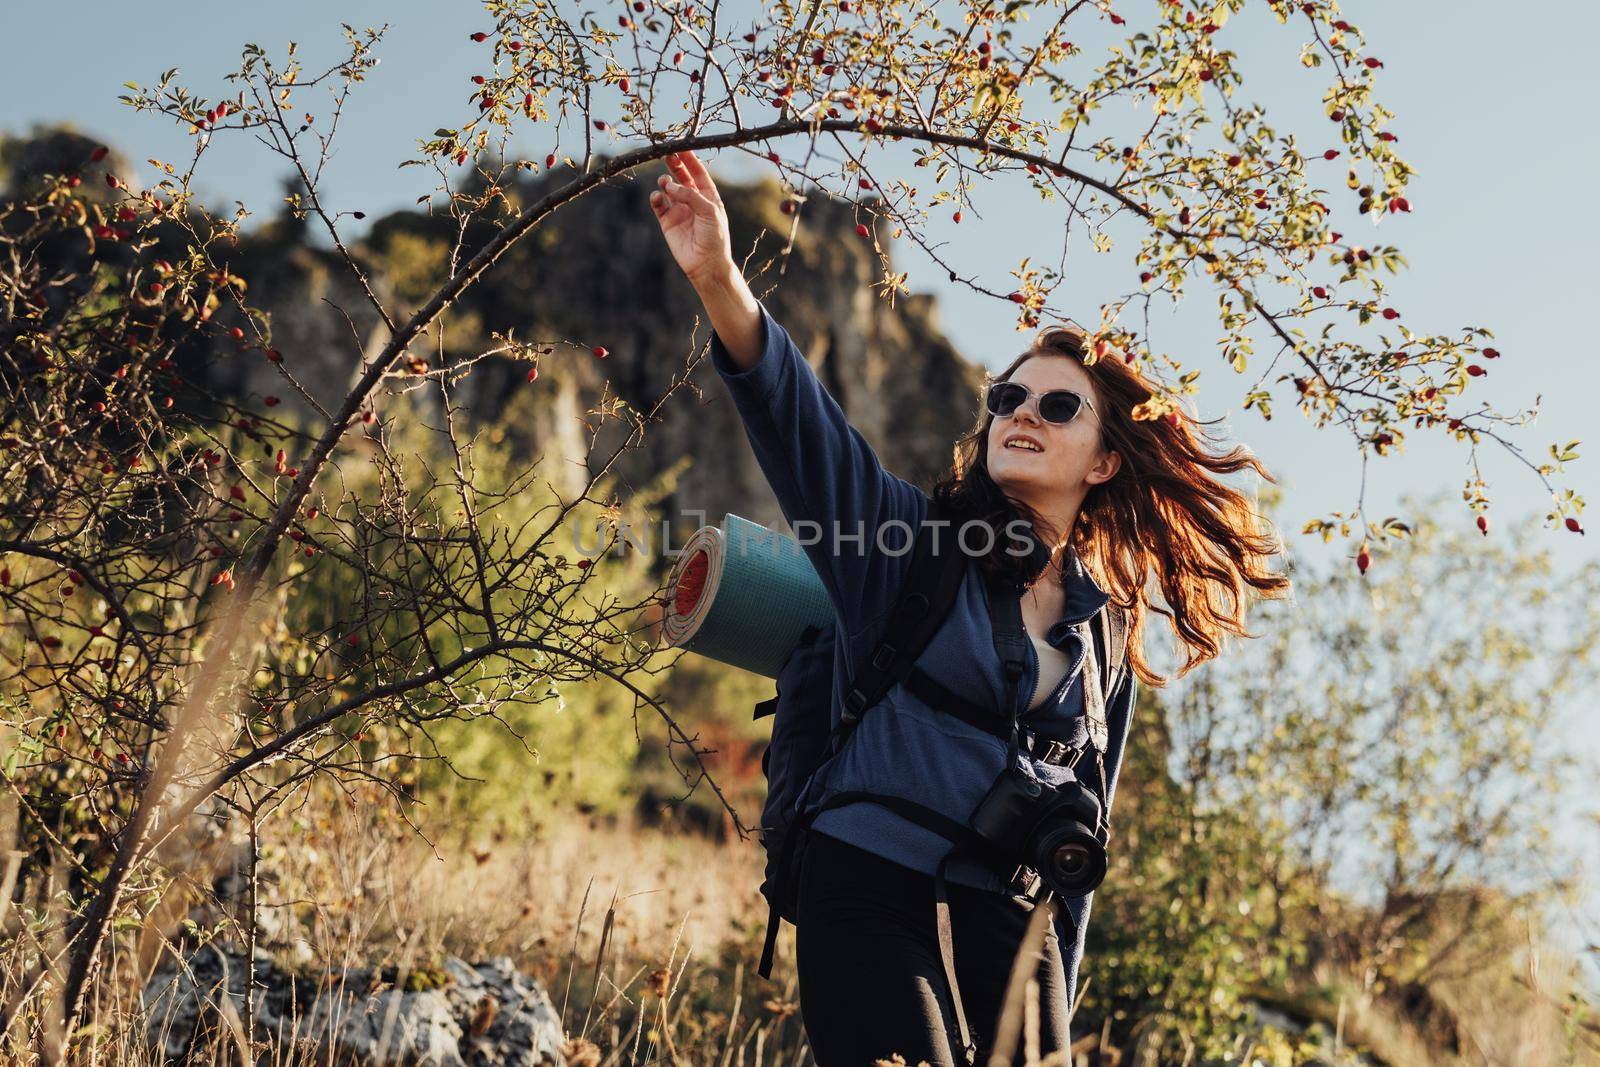 Cheerful Young Travel Woman in Sunglasses With Backpack with Camping Mat and Digital Camera on a Strap Making Her Way Through the Thickets During Her Hike by Romvy